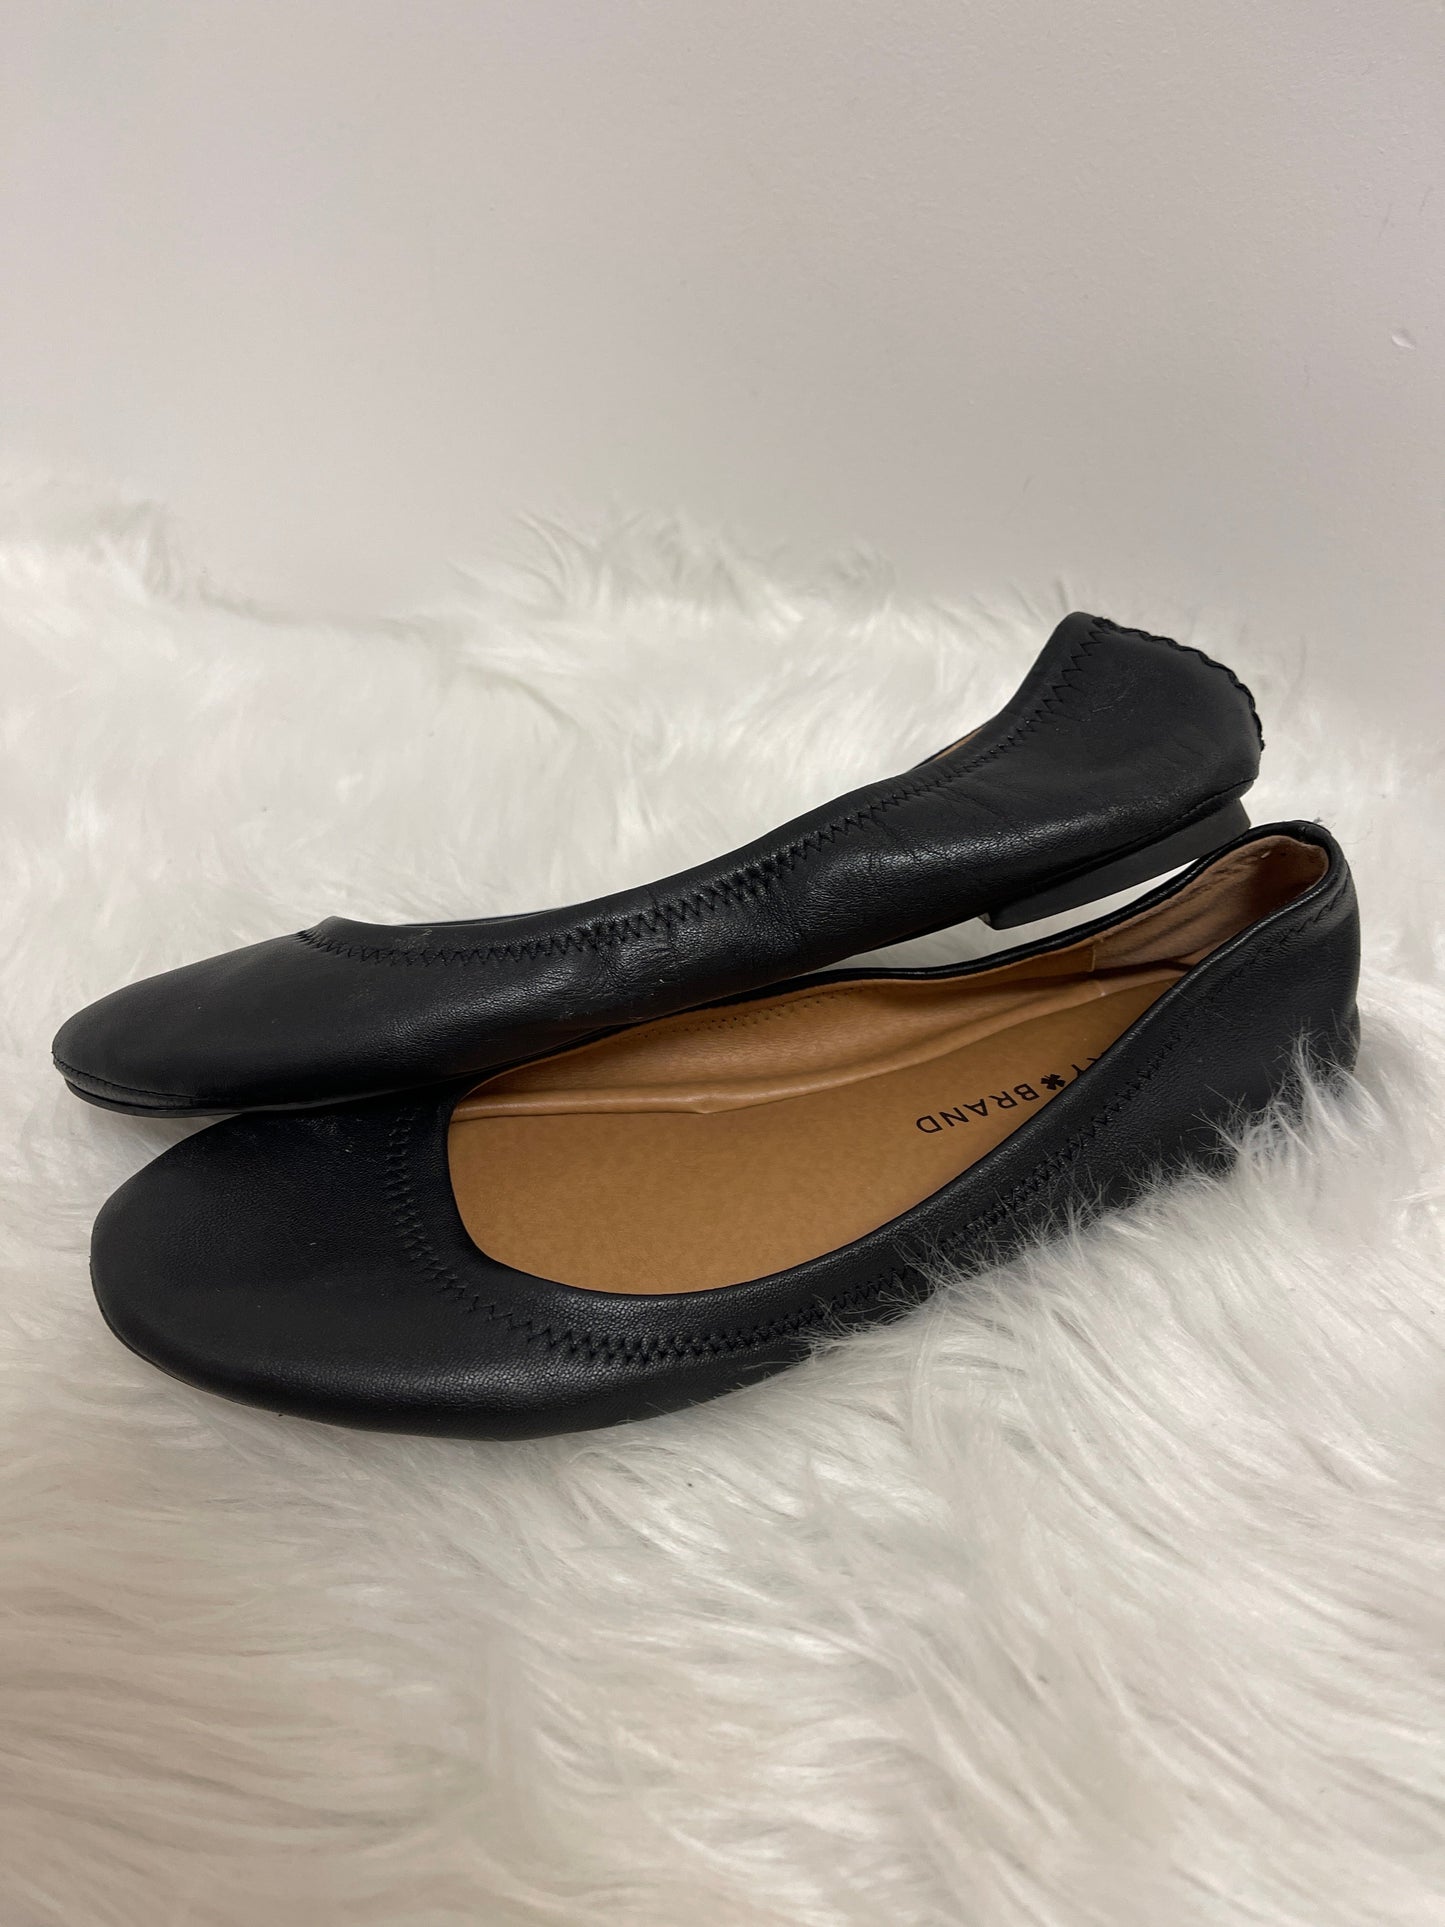 Black Shoes Flats Lucky Brand, Size 8.5